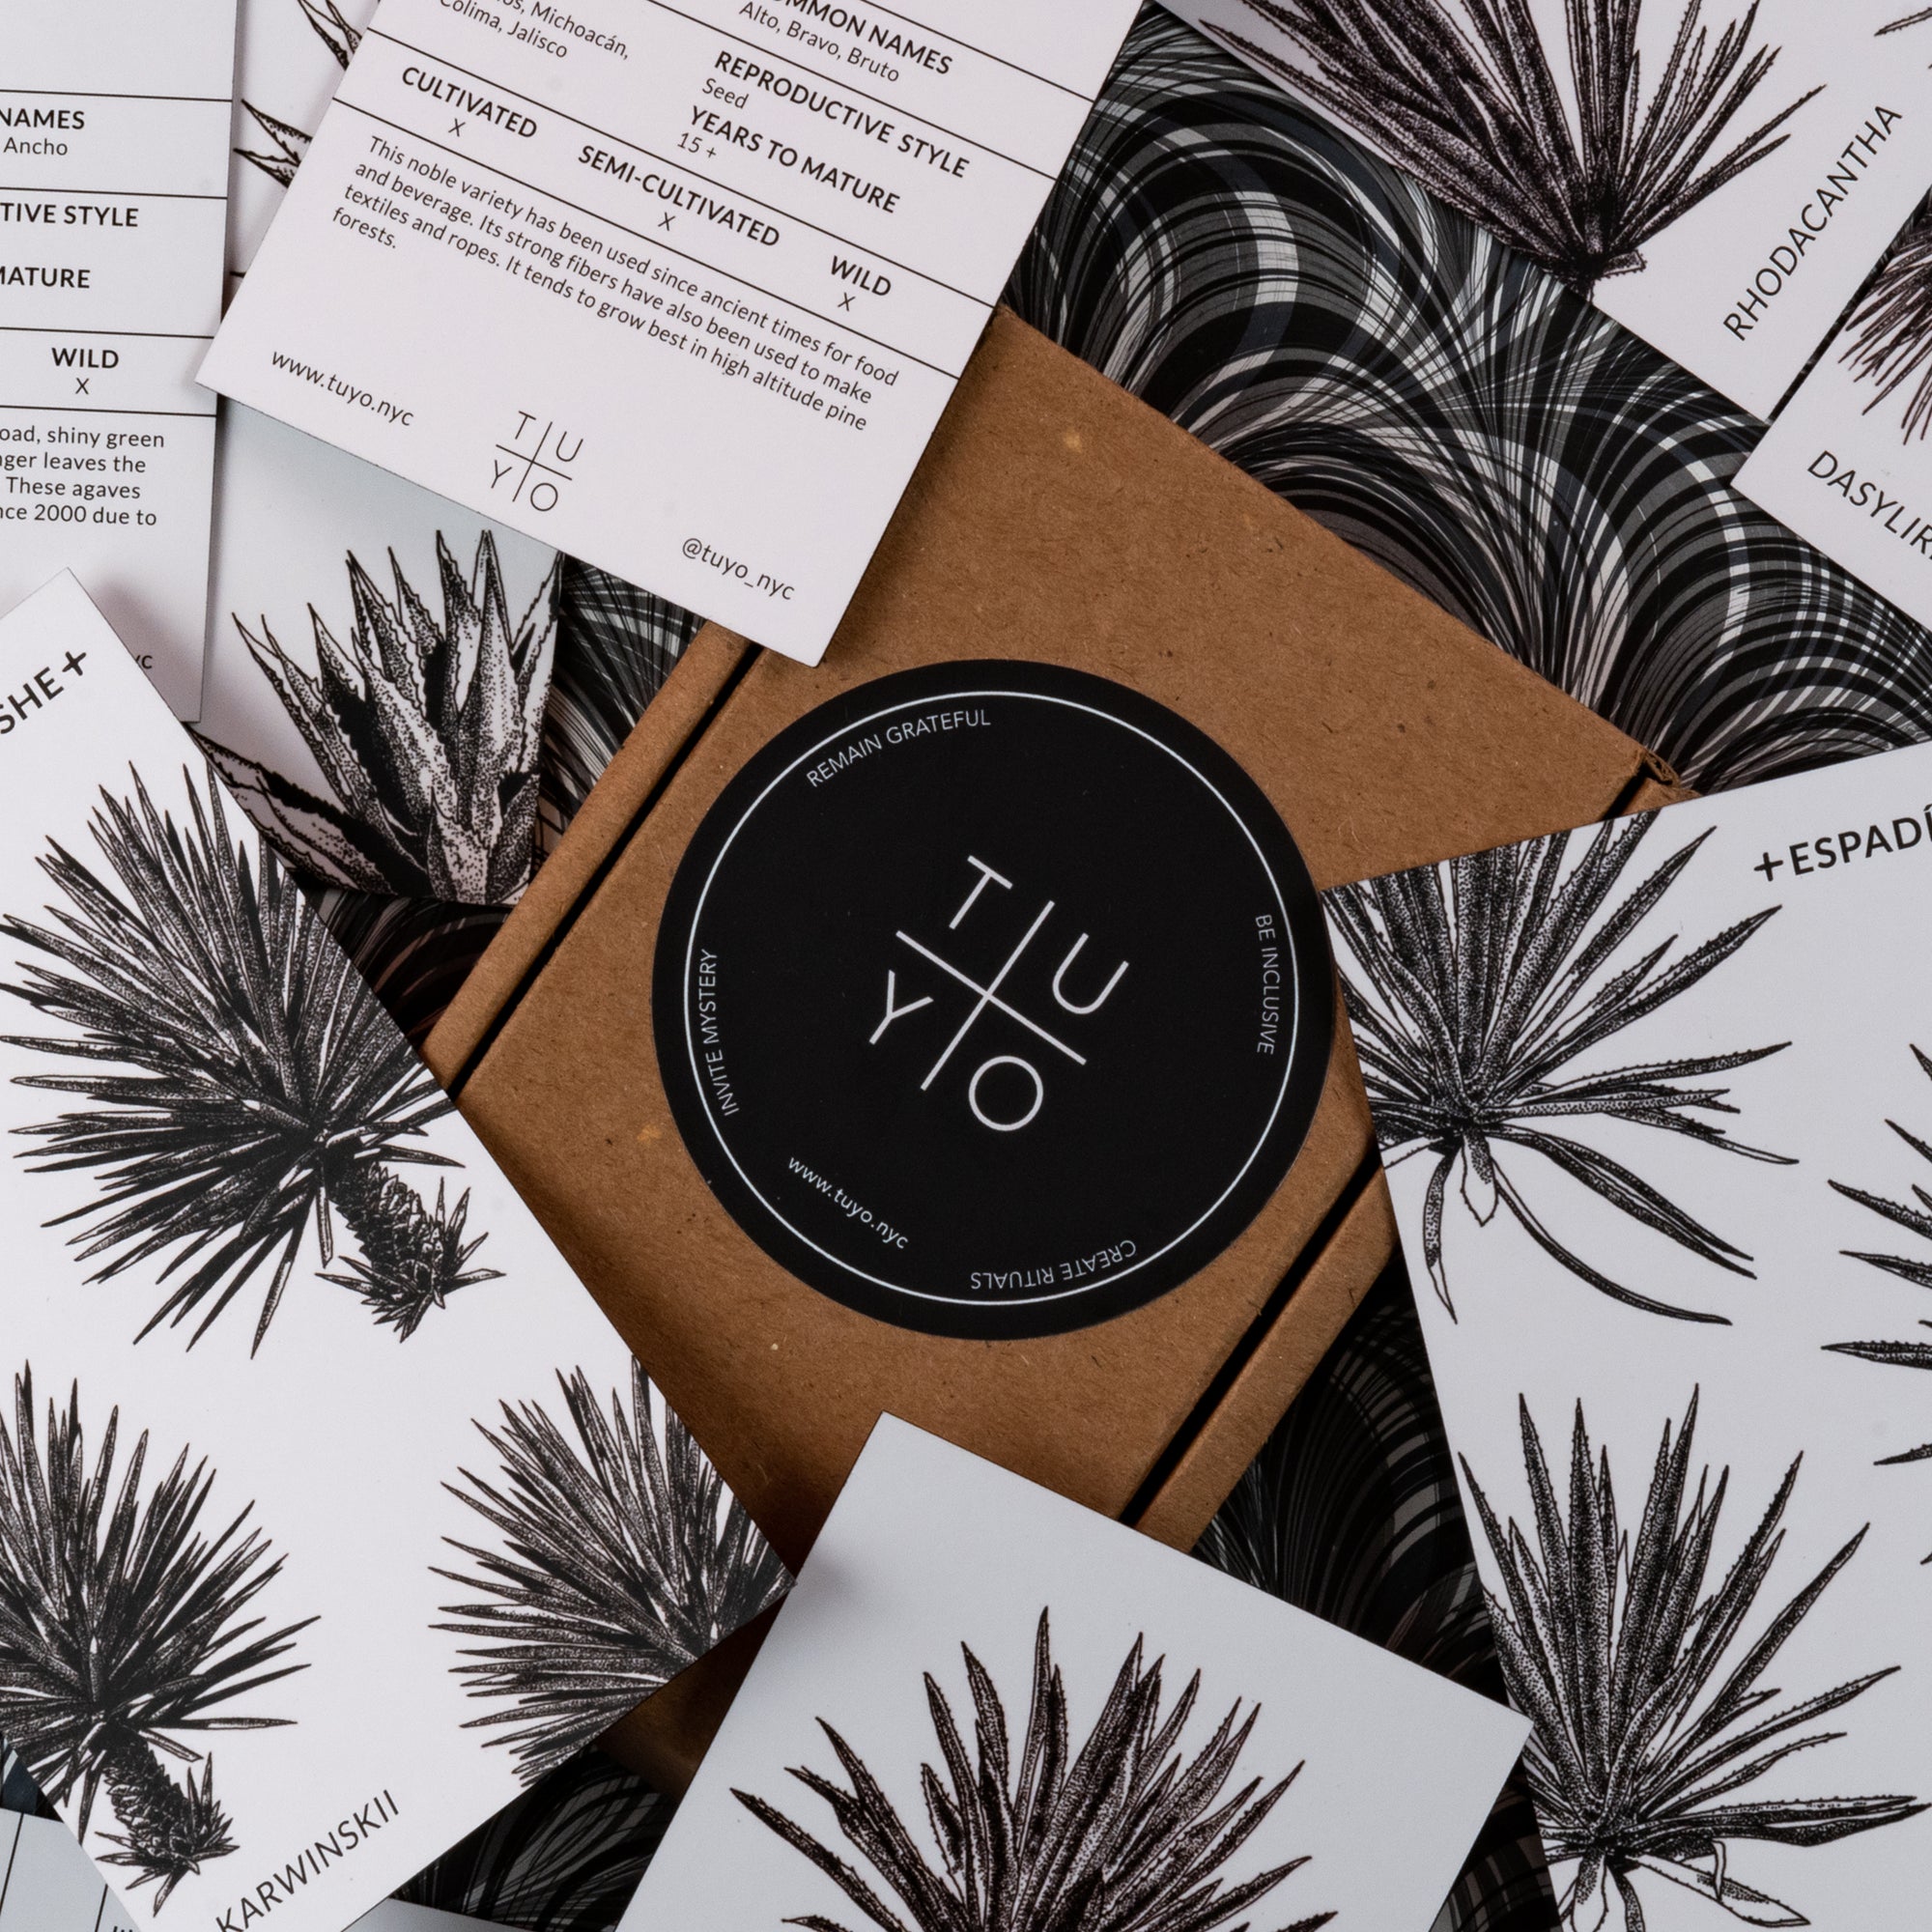 Printed agave id cards featuring the names and info for 14 different agave plants used to make mezcal.